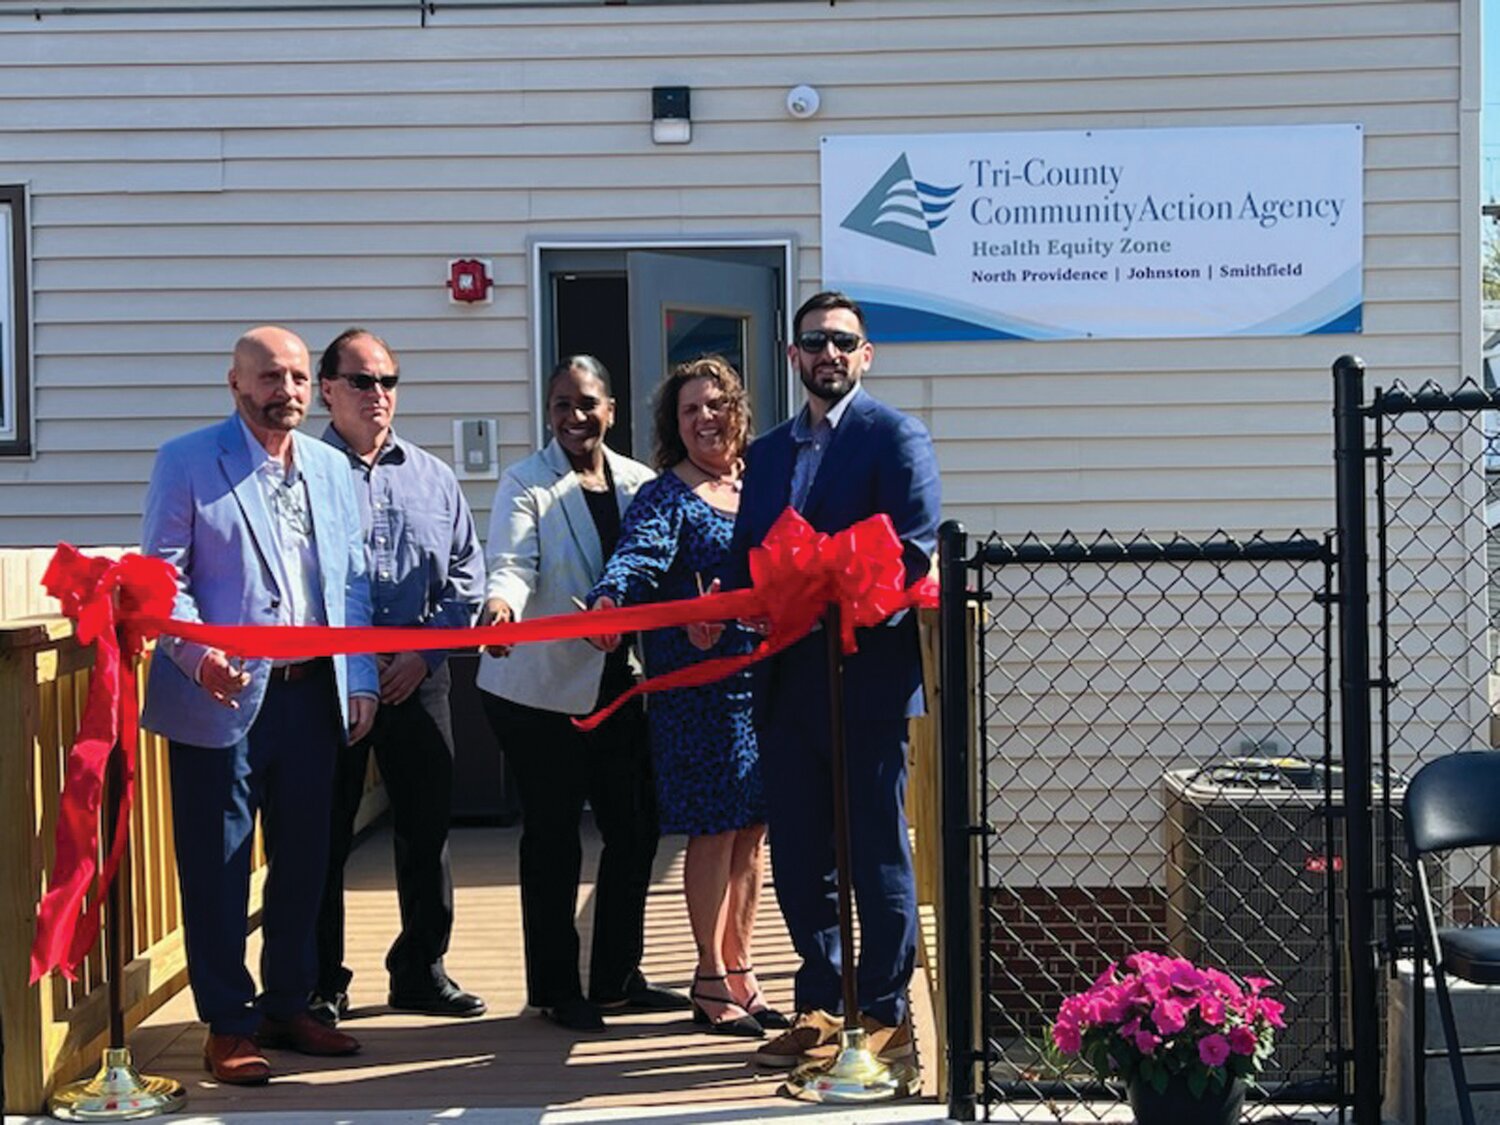 HEZ DISPENSER: Tri-County Community Action Agency snipped the ribbon on a new Health Equity Zone (HEZ) Community Center at 104 Greenville Ave. in Johnston. From left to right, Tri-County President and CEO Joseph DeSantis, Johnston Town Council member Alfred T. Carnevale, Nadine Tavares, lead HEZ initiative project officer with the Rhode Island Department of Health, HEZ Director Lisa Kennedy, and Johnston Mayor Joseph Polisena Jr. helped cut the ribbon on the new center. (Photos courtesy Tri-County)